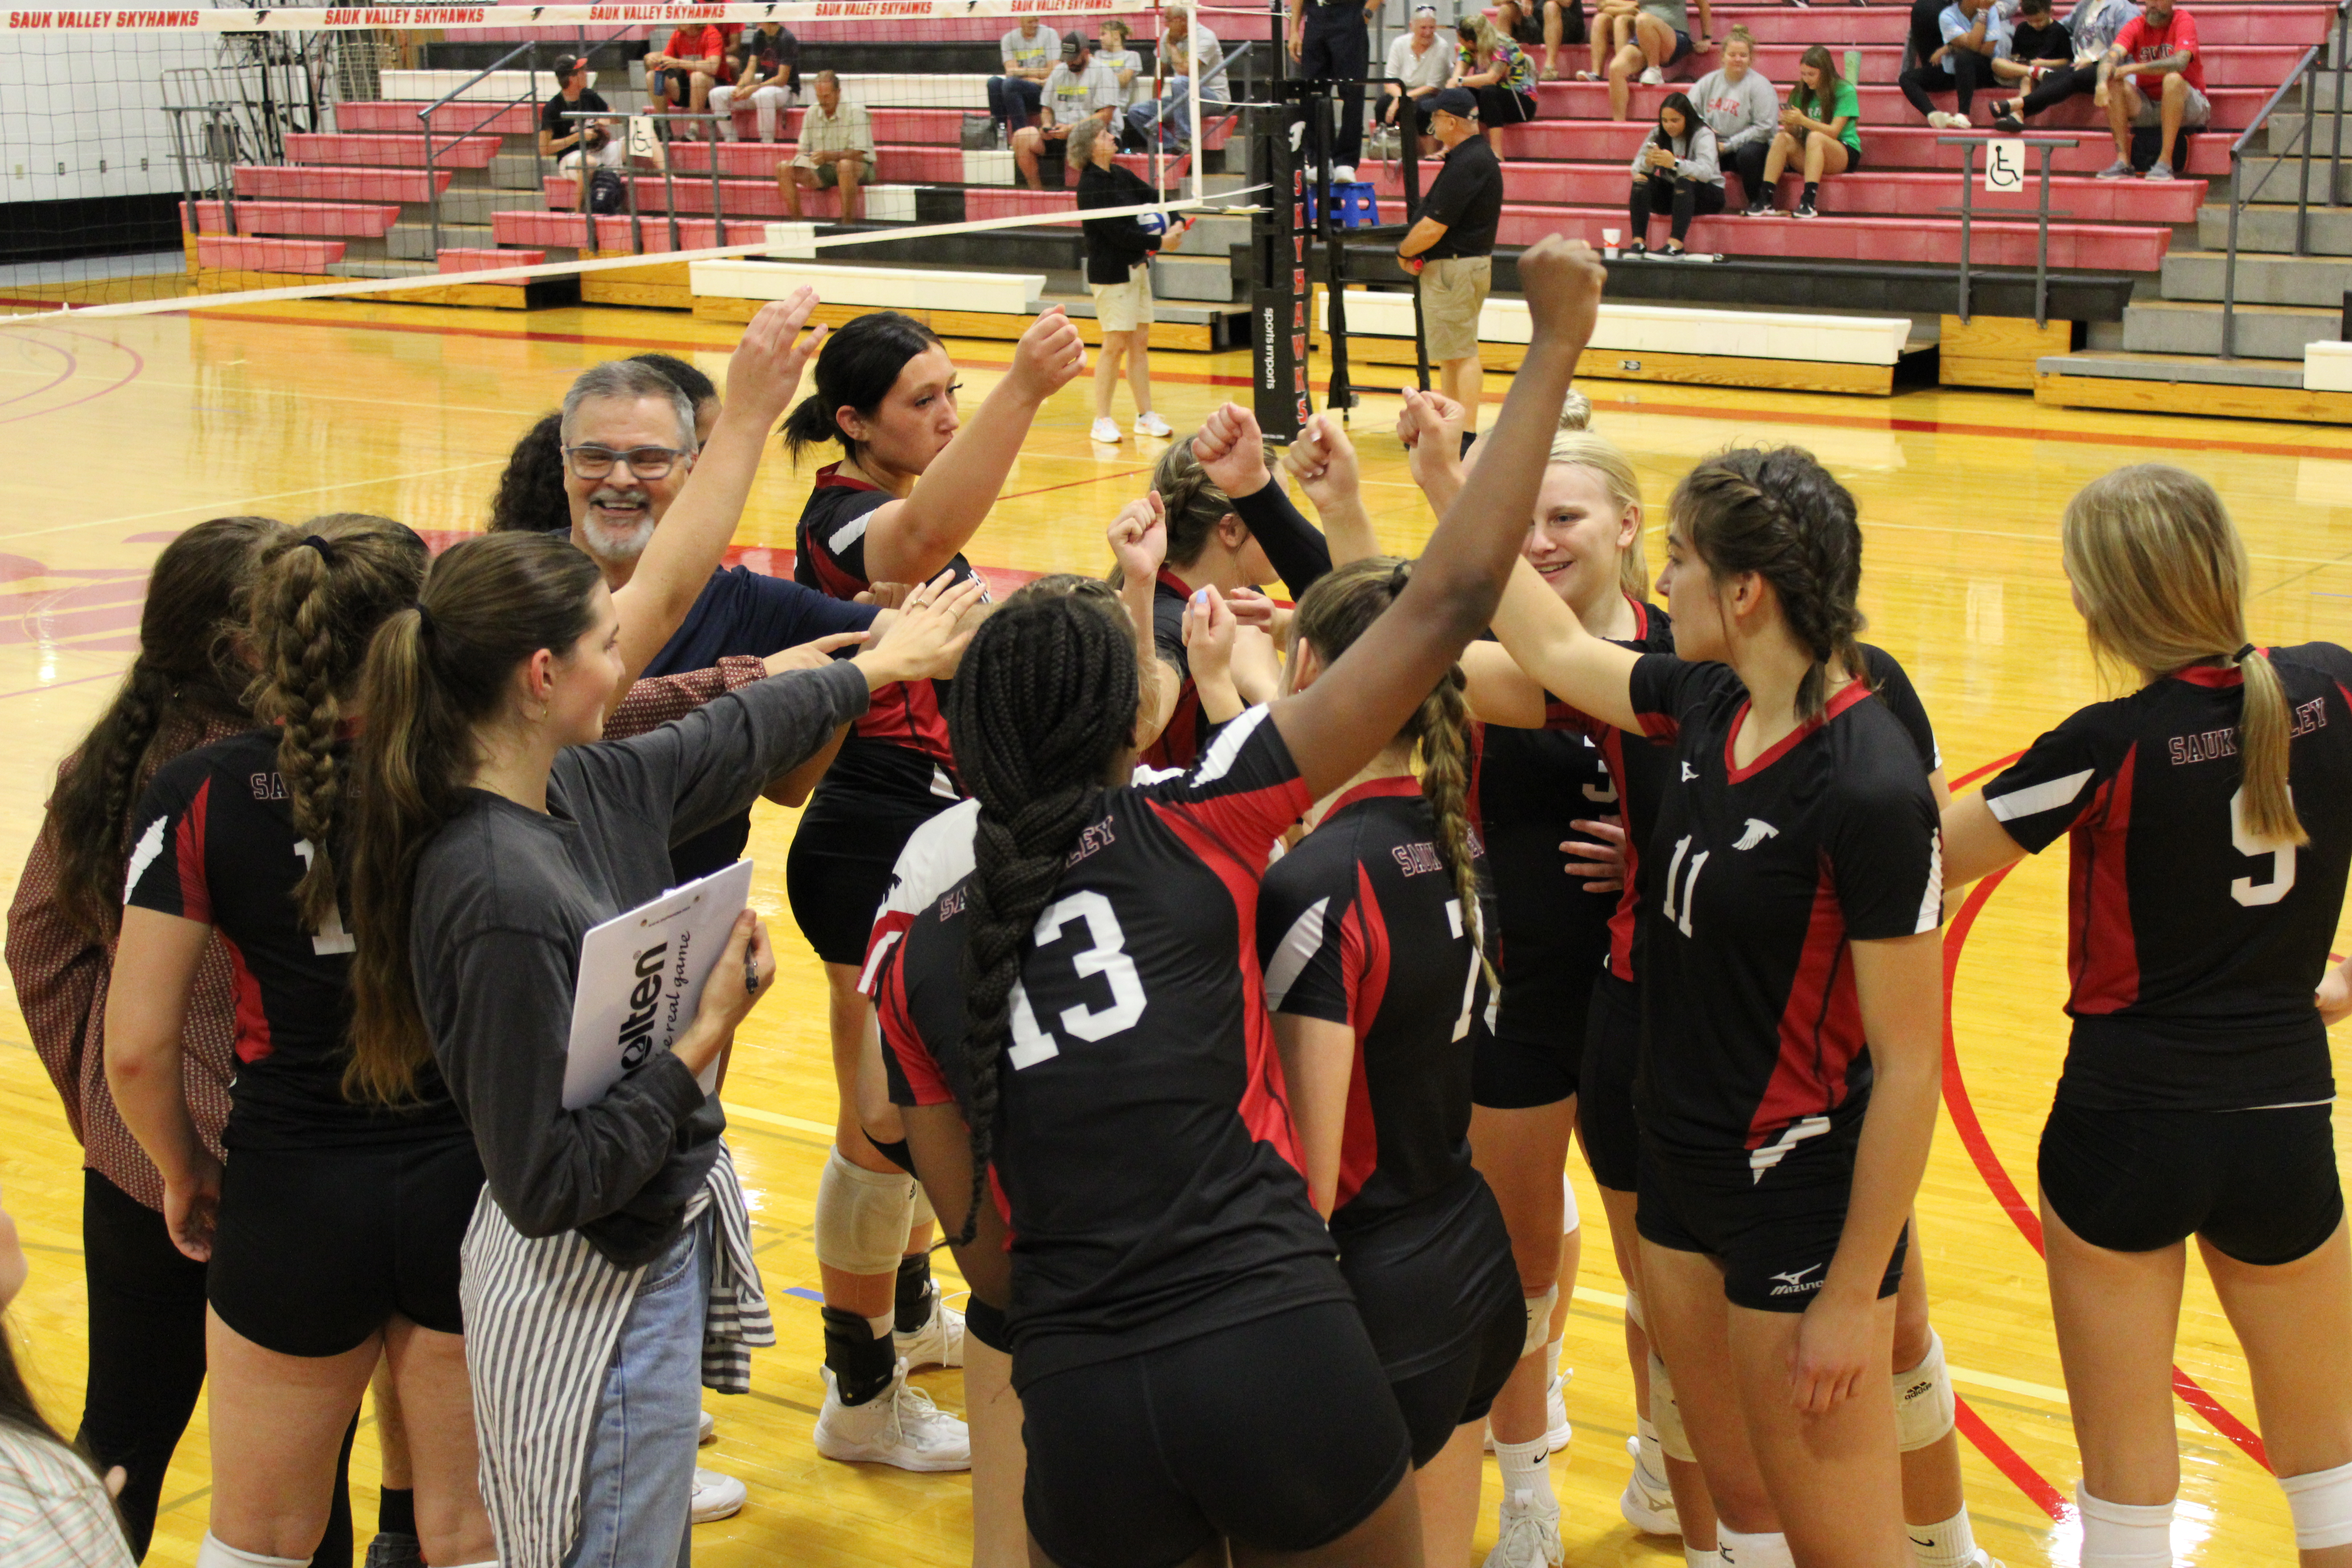 The Sauk Valley’s volleyball team displays teamwork after a home game win against Black Hawk College on September 9th, 2022.